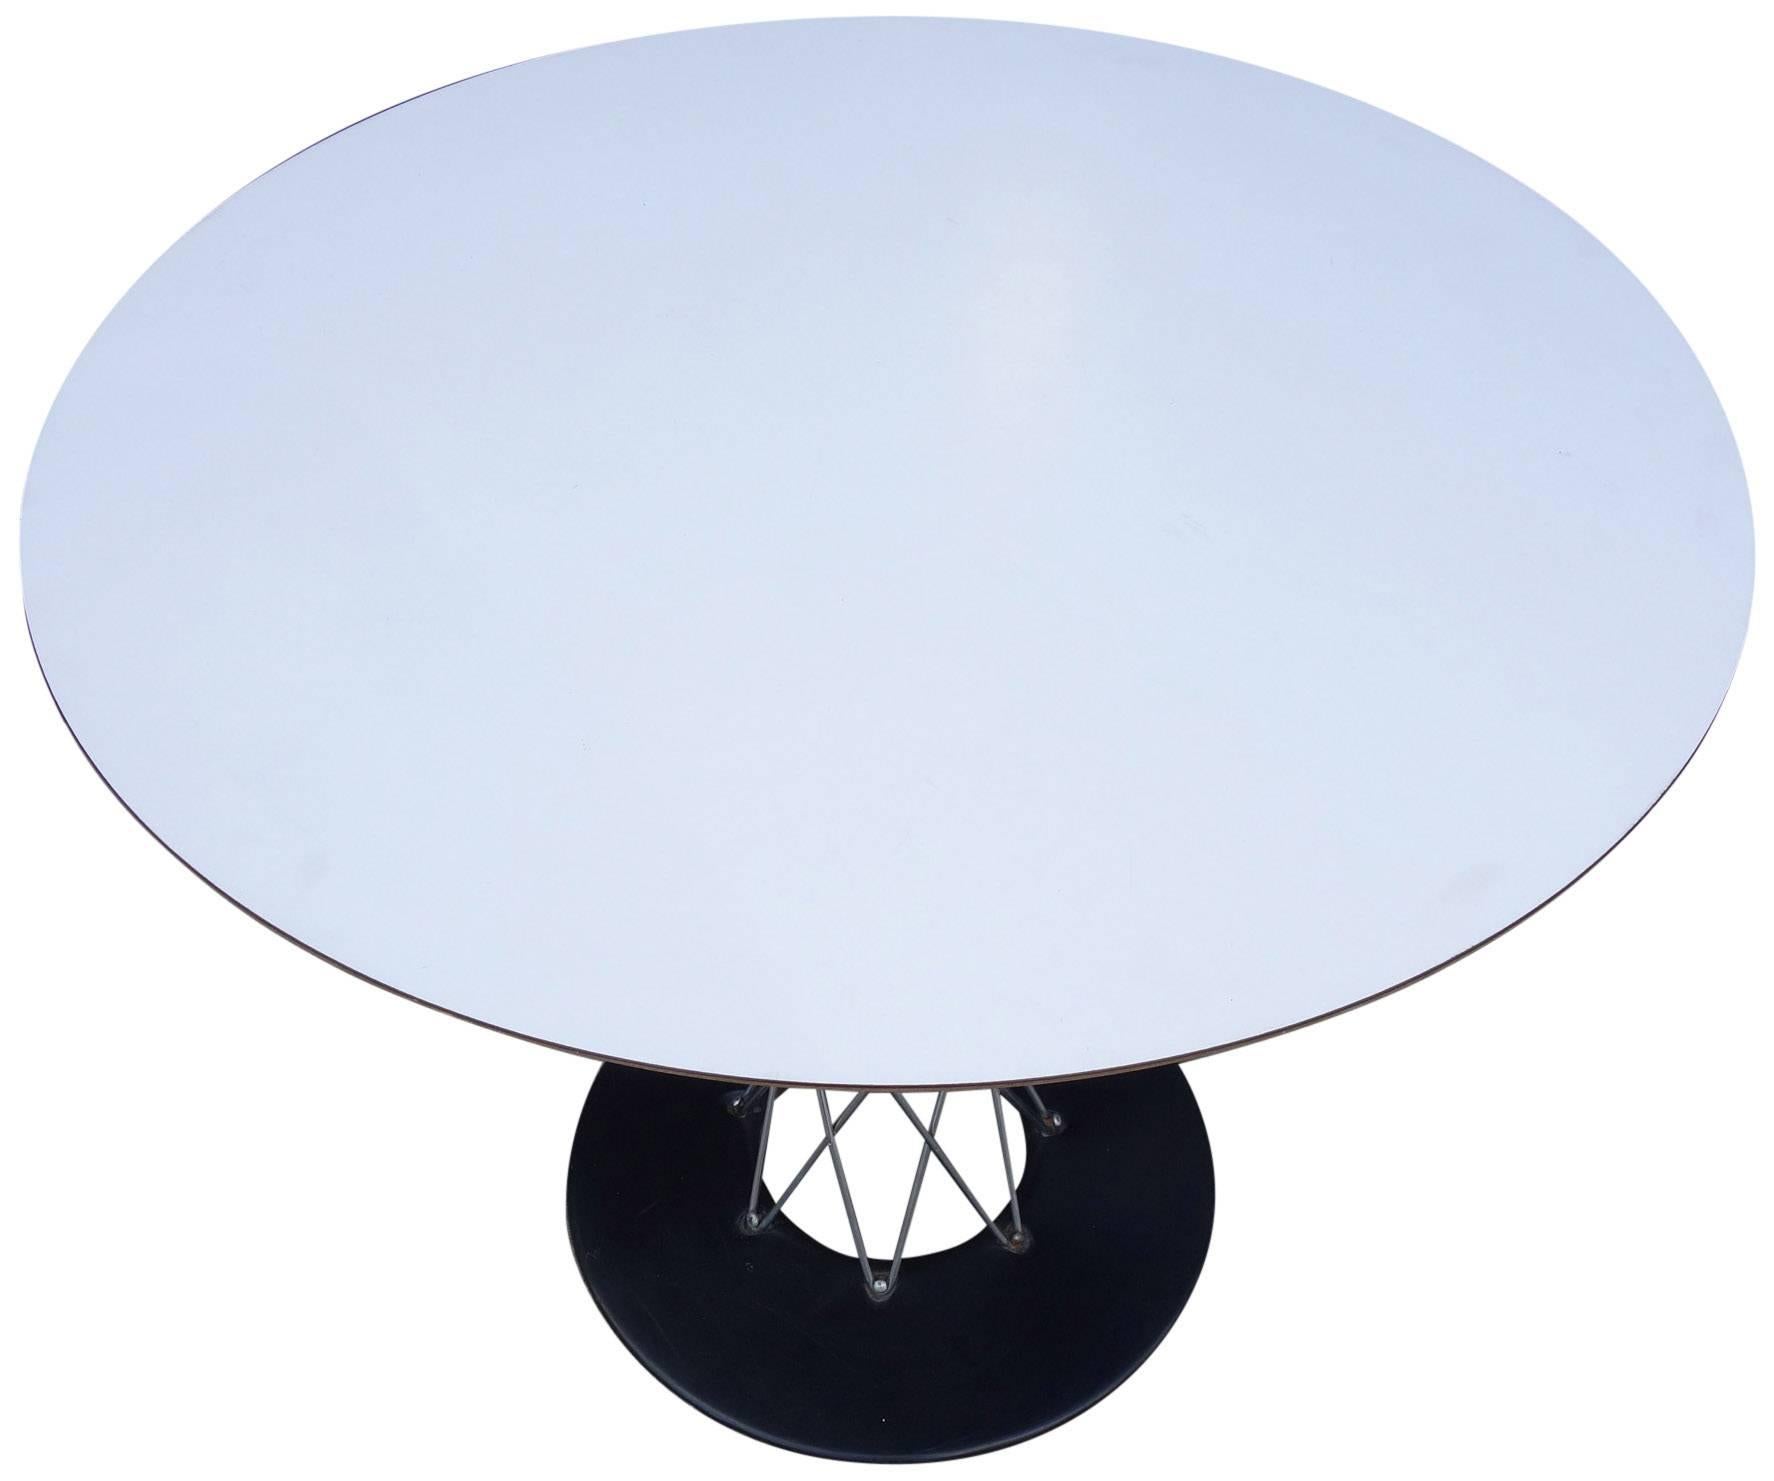 Designed by Isamu Noguchi. The hard to find 35'' diameter top is a perfect apartment size dining, game or kitchen table.

This striking design features a white laminate top with exposed plywood lip. The chromed mid section is anchored by a cast